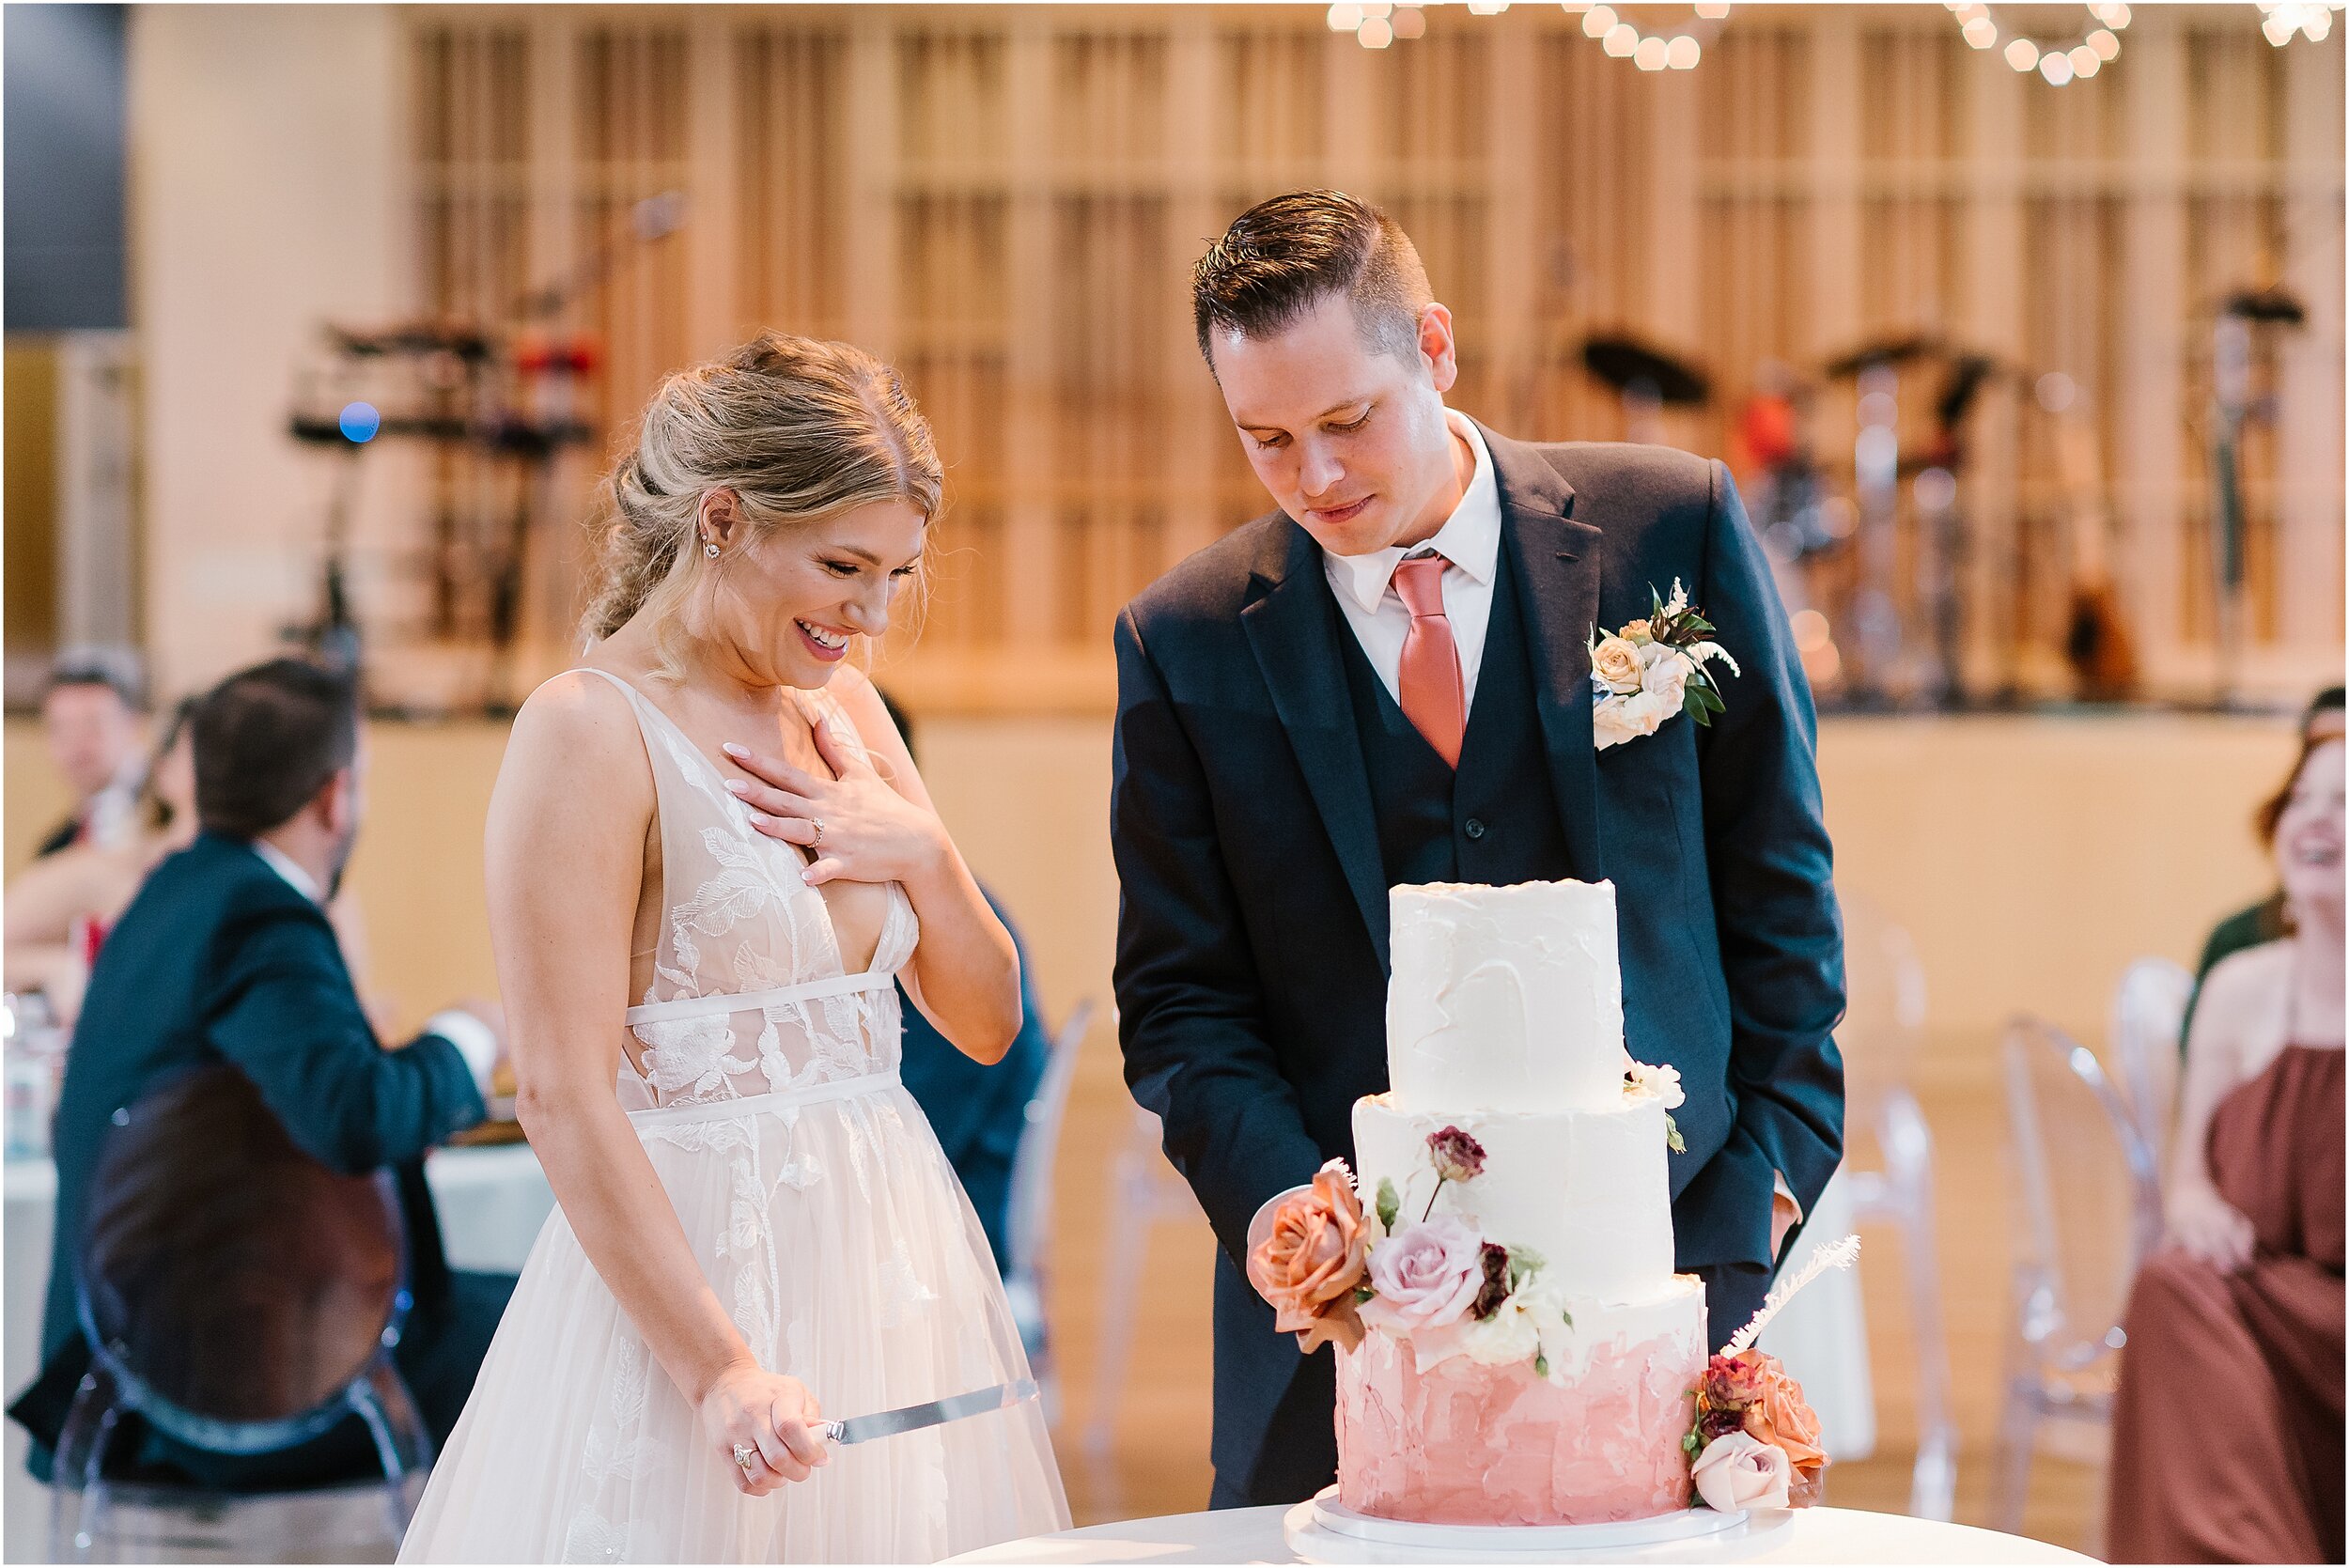 Rebecca Shehorn Photography Colleen and Kyle Inn at Irwin Gardens Wedding-898_The Commons Columbus Inn at Irwin Garden Indianapolis Wedding Photographer.jpg